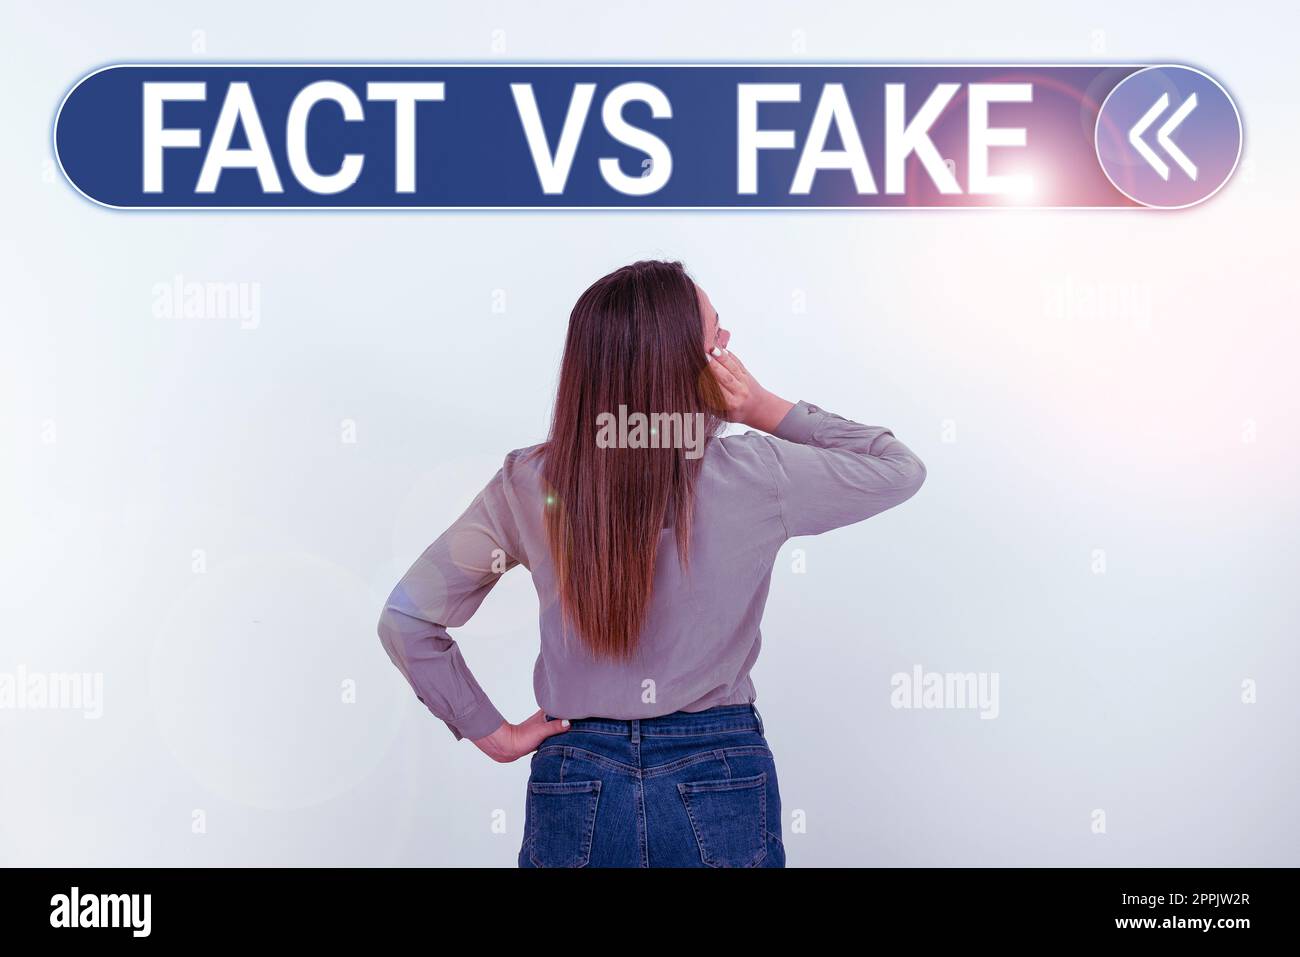 Text showing inspiration Fact Vs Fake. Internet Concept Is it true or is false doubt if something is real authentic Stock Photo